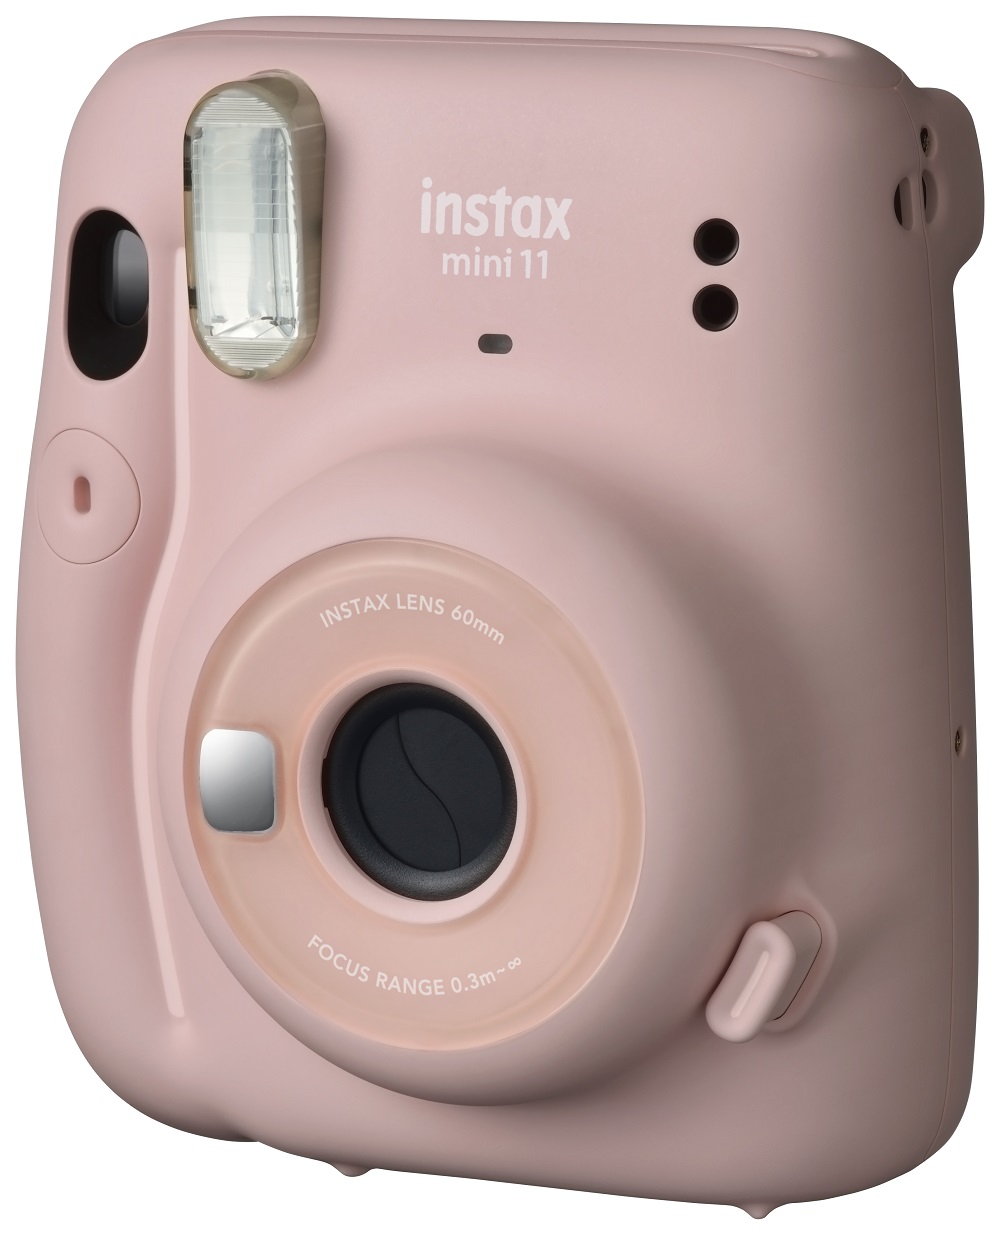 Instax Mini 11 Camera with Automatic Exposure & Selfie Mode Launched ...